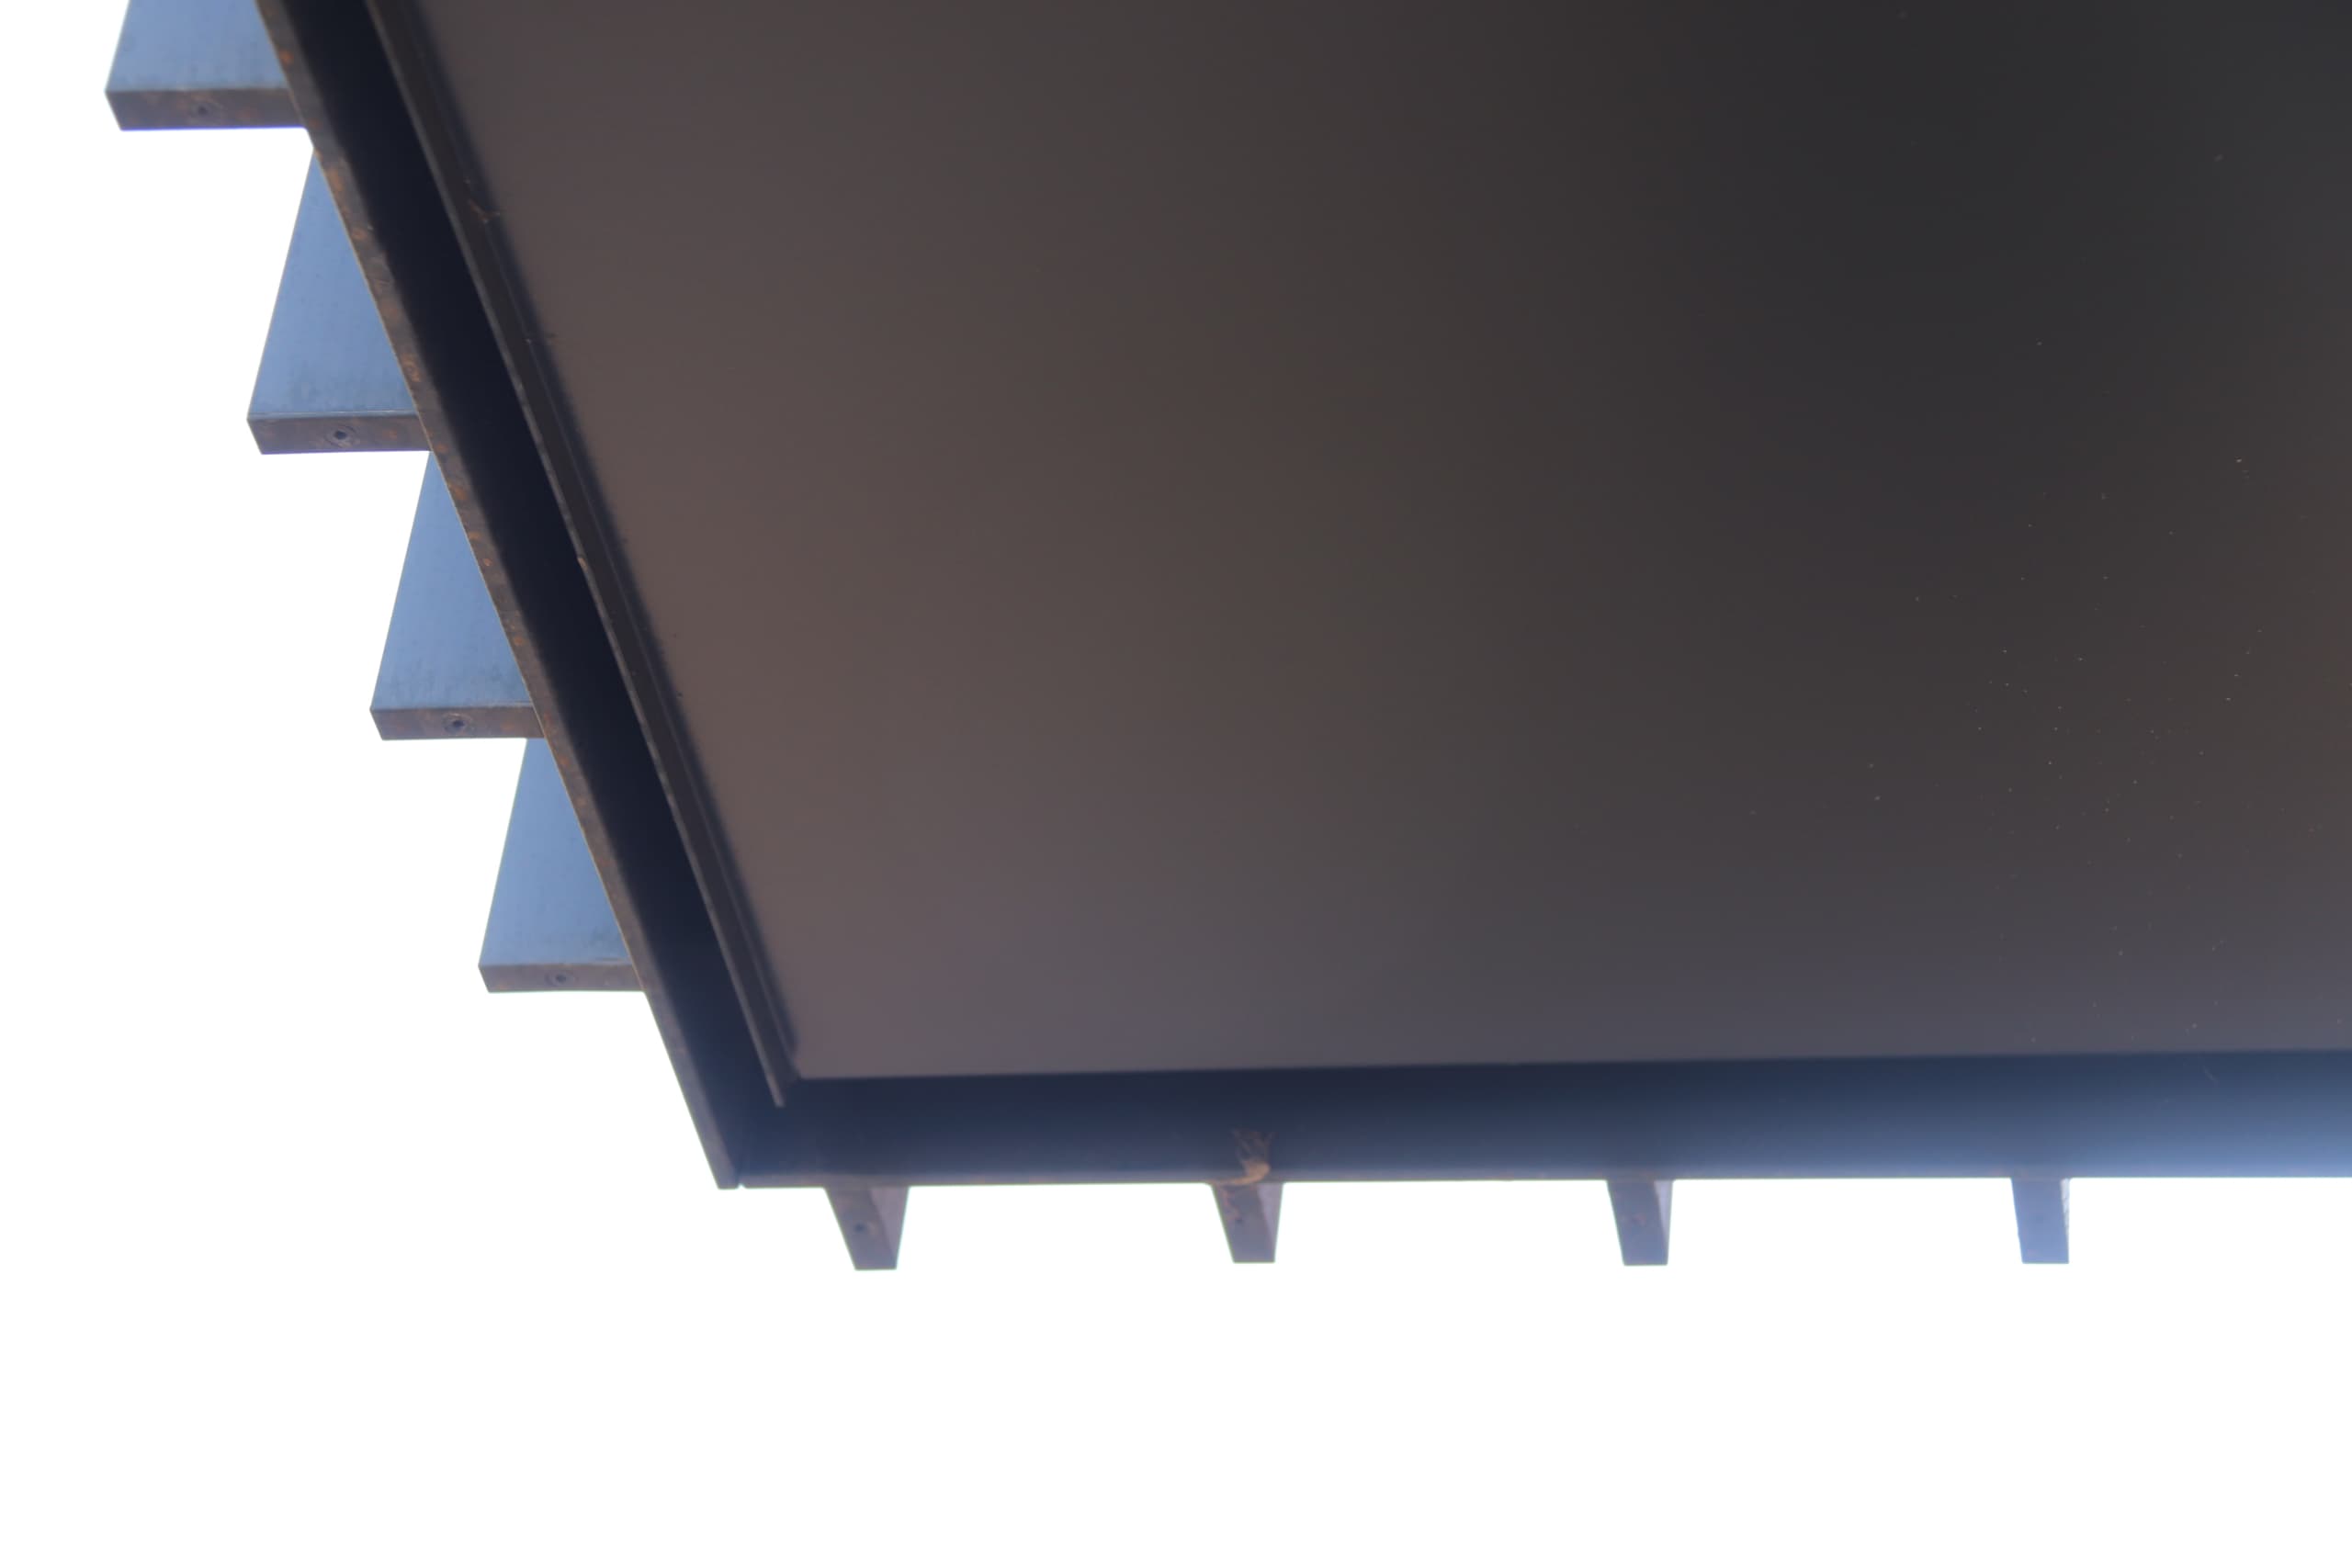 Balcony soffits on underside provide drip edge draining water into front shadow gap on a balcony